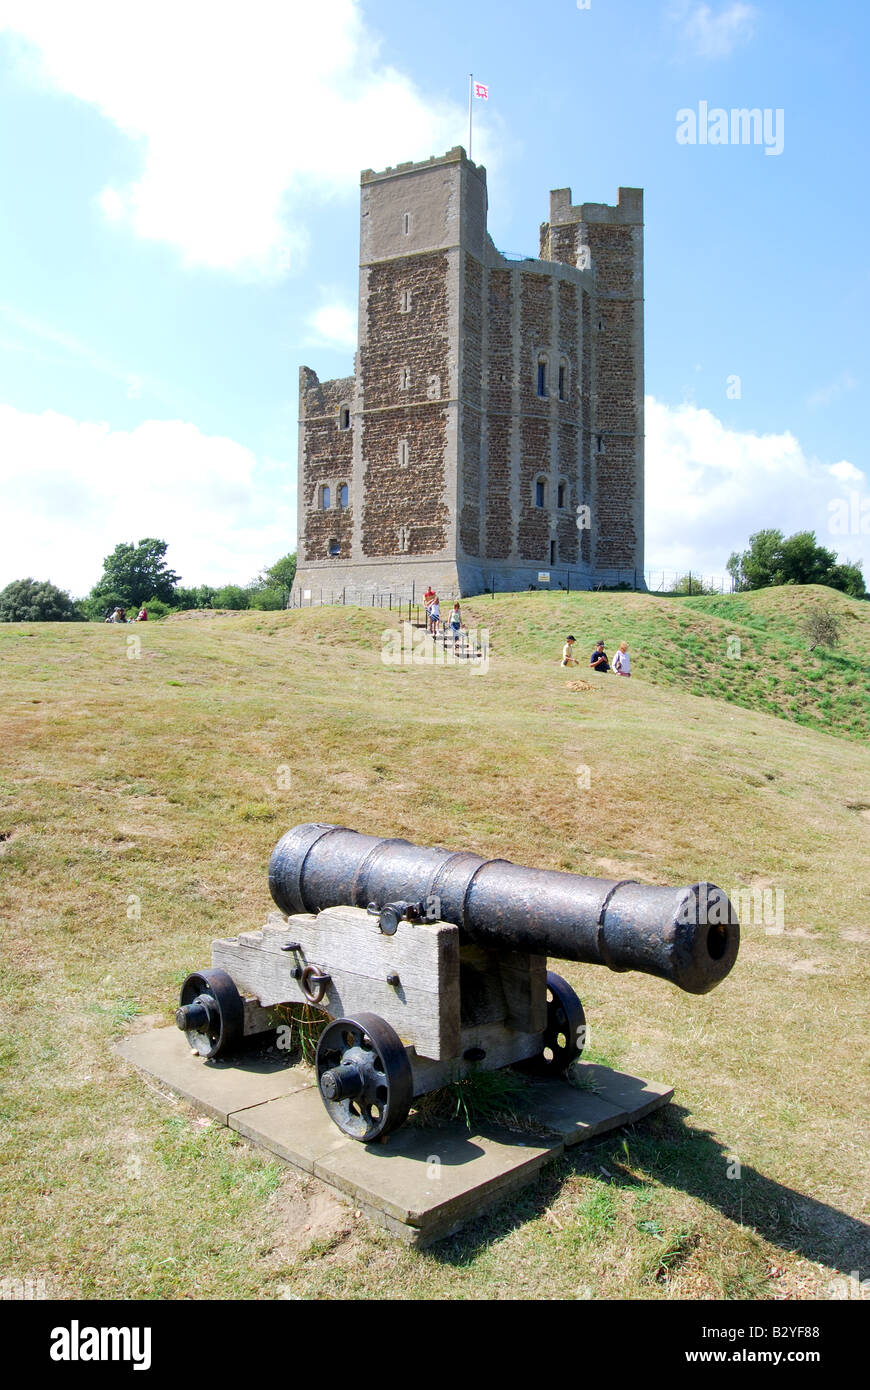 Château d'Orford, Orford, Suffolk, Angleterre, Royaume-Uni Banque D'Images